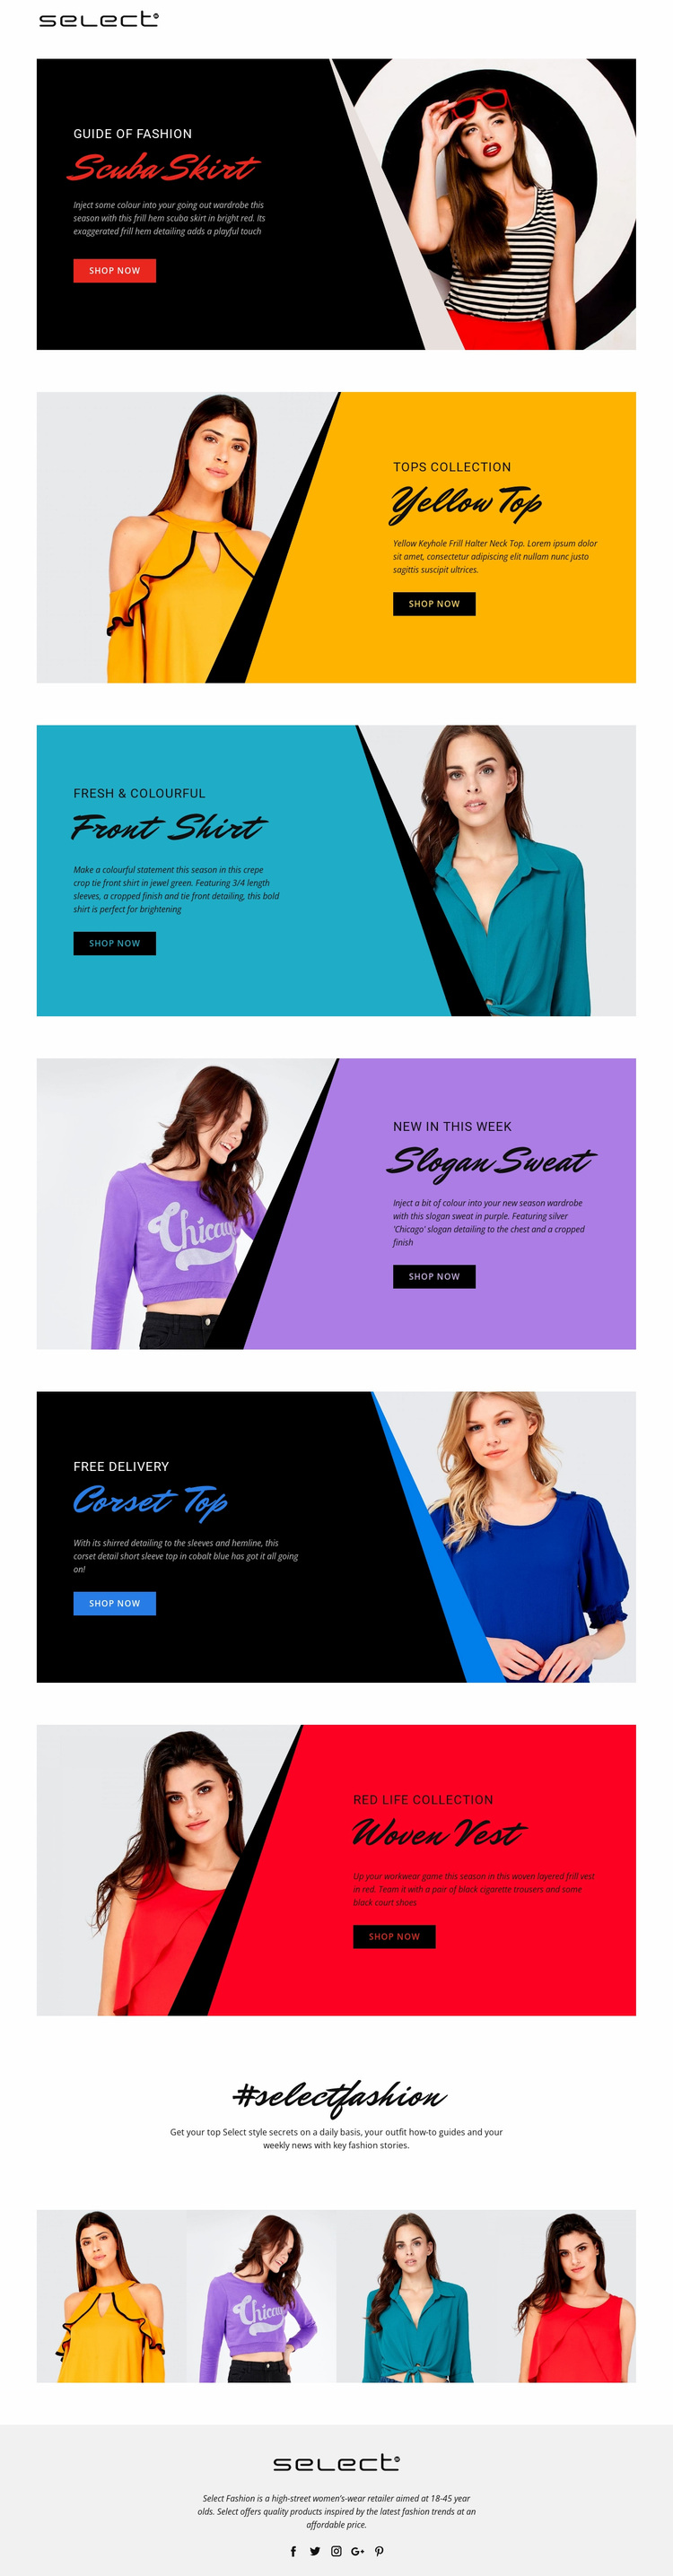 Learn about dress codes Website Design